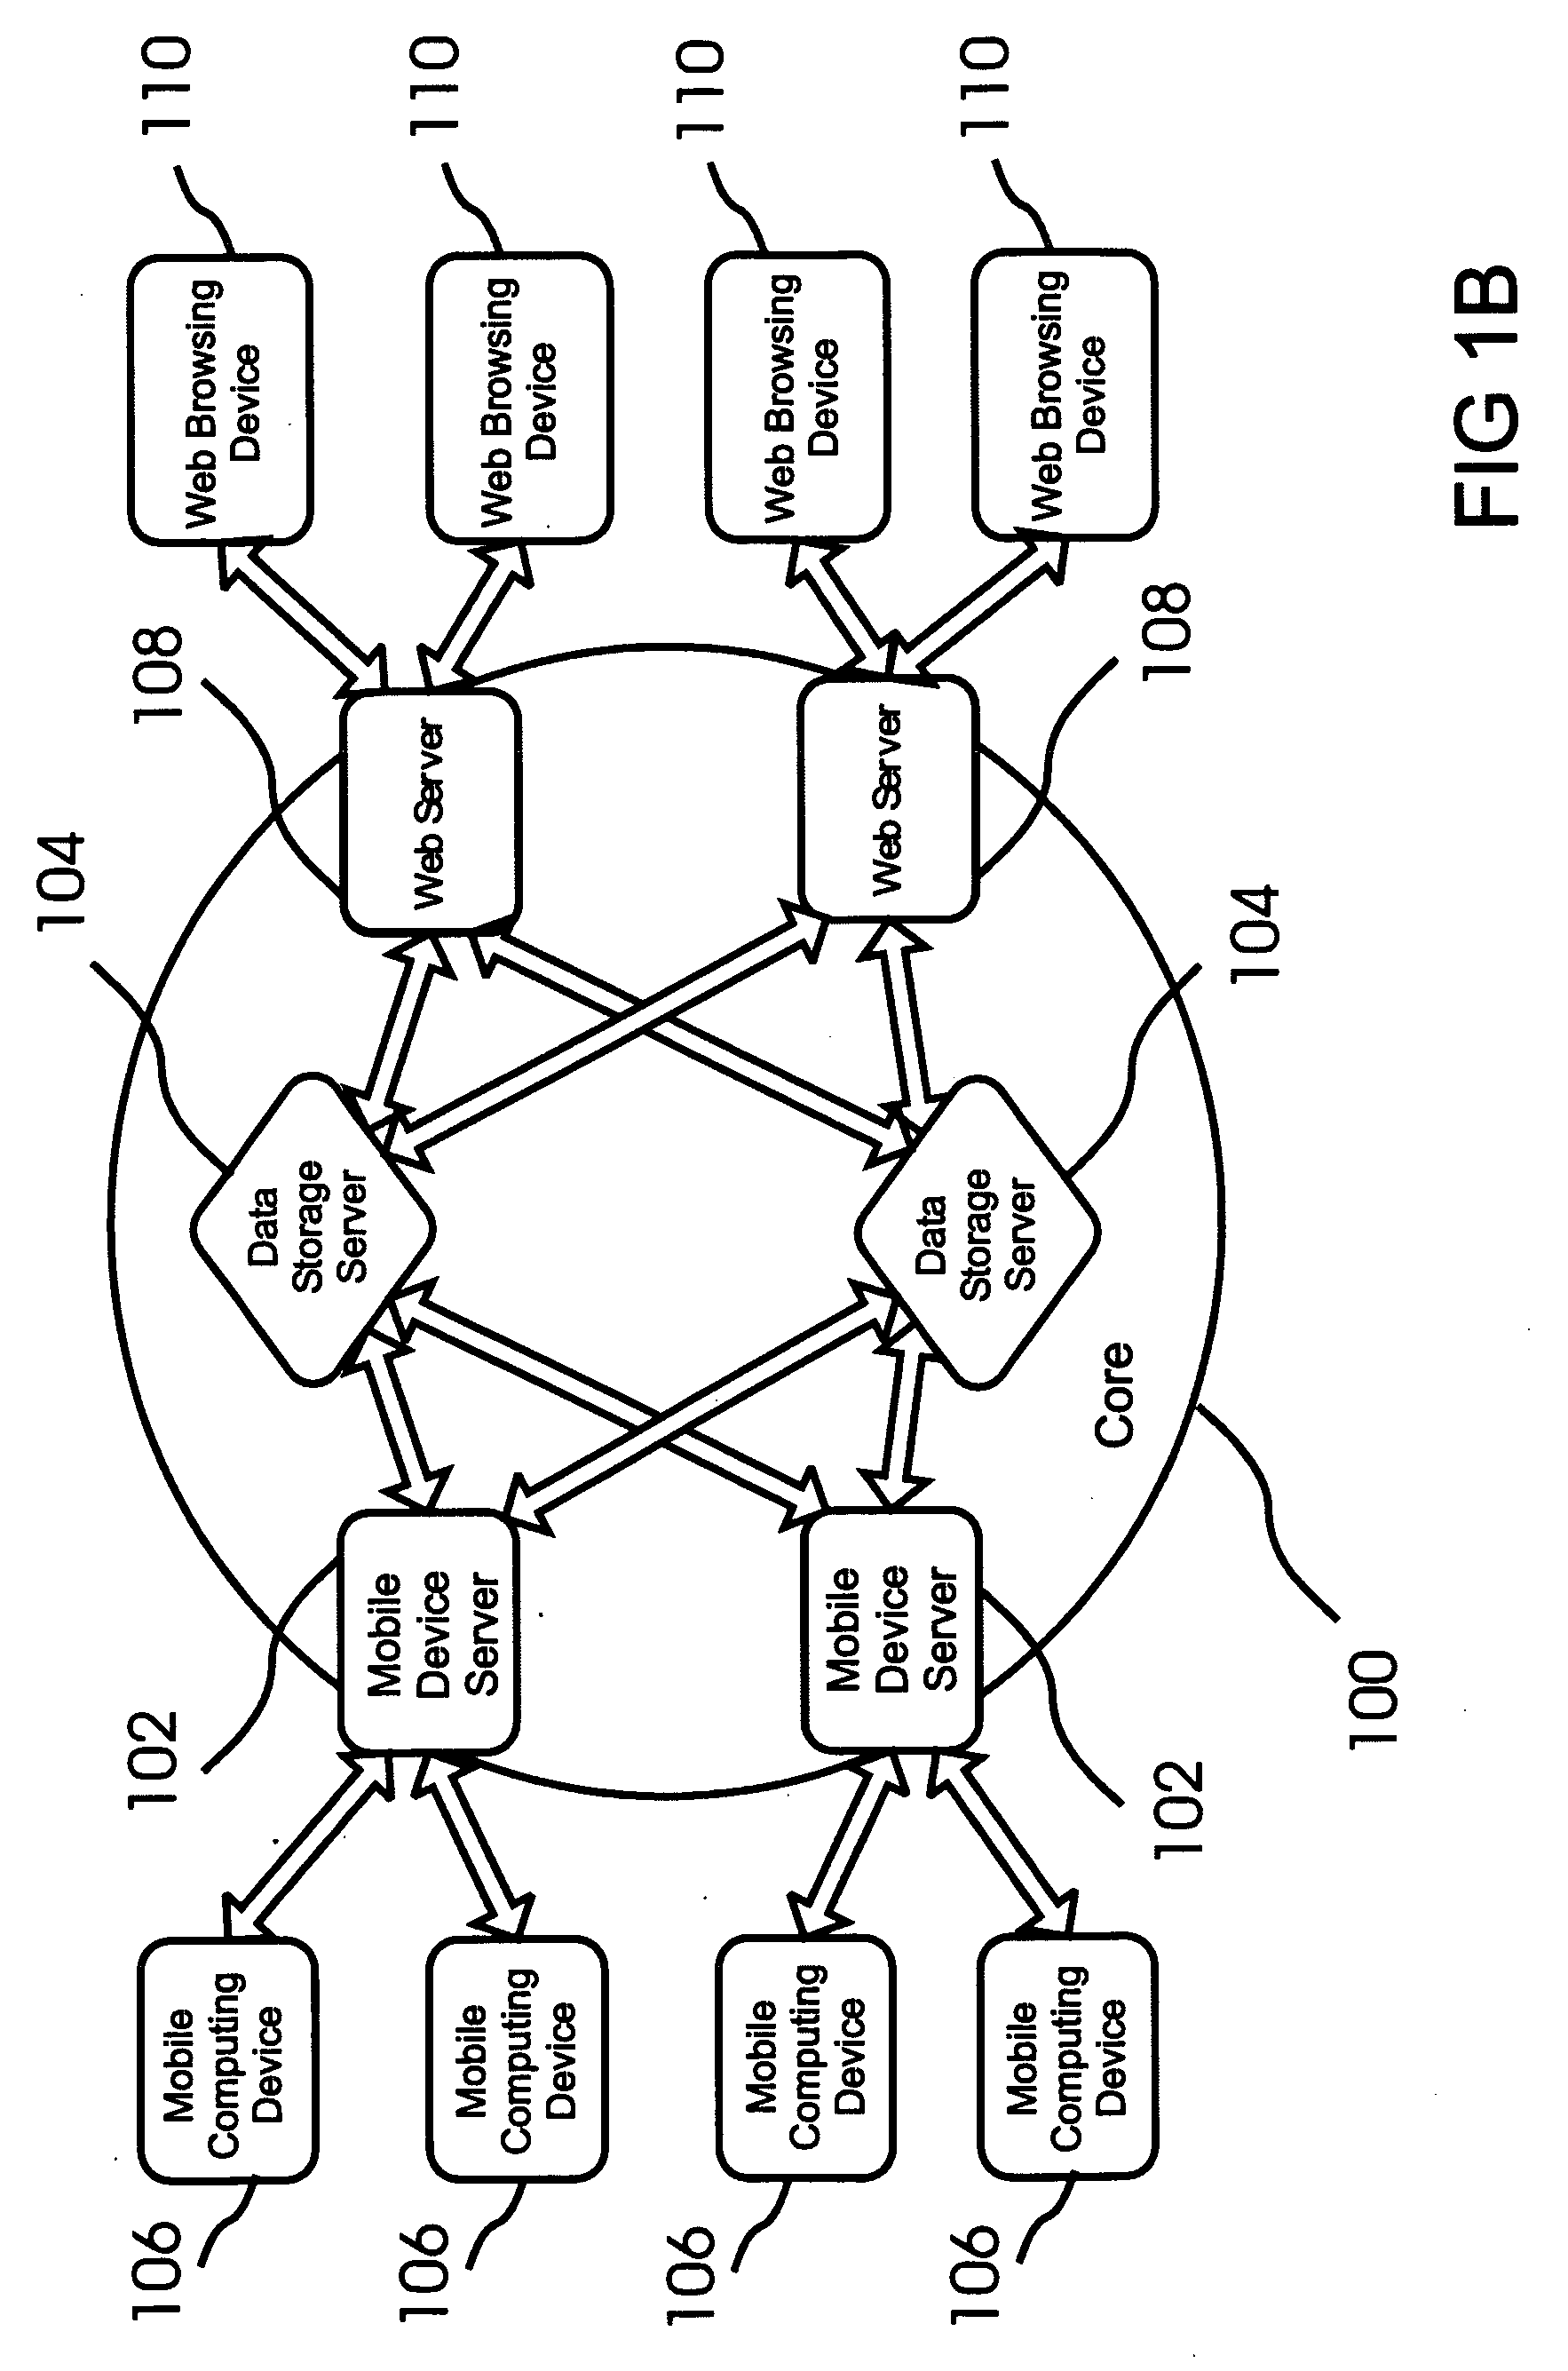 Method for Exchanging Location-Relevant Information Using a Mobile Device with an Interactive Map Display